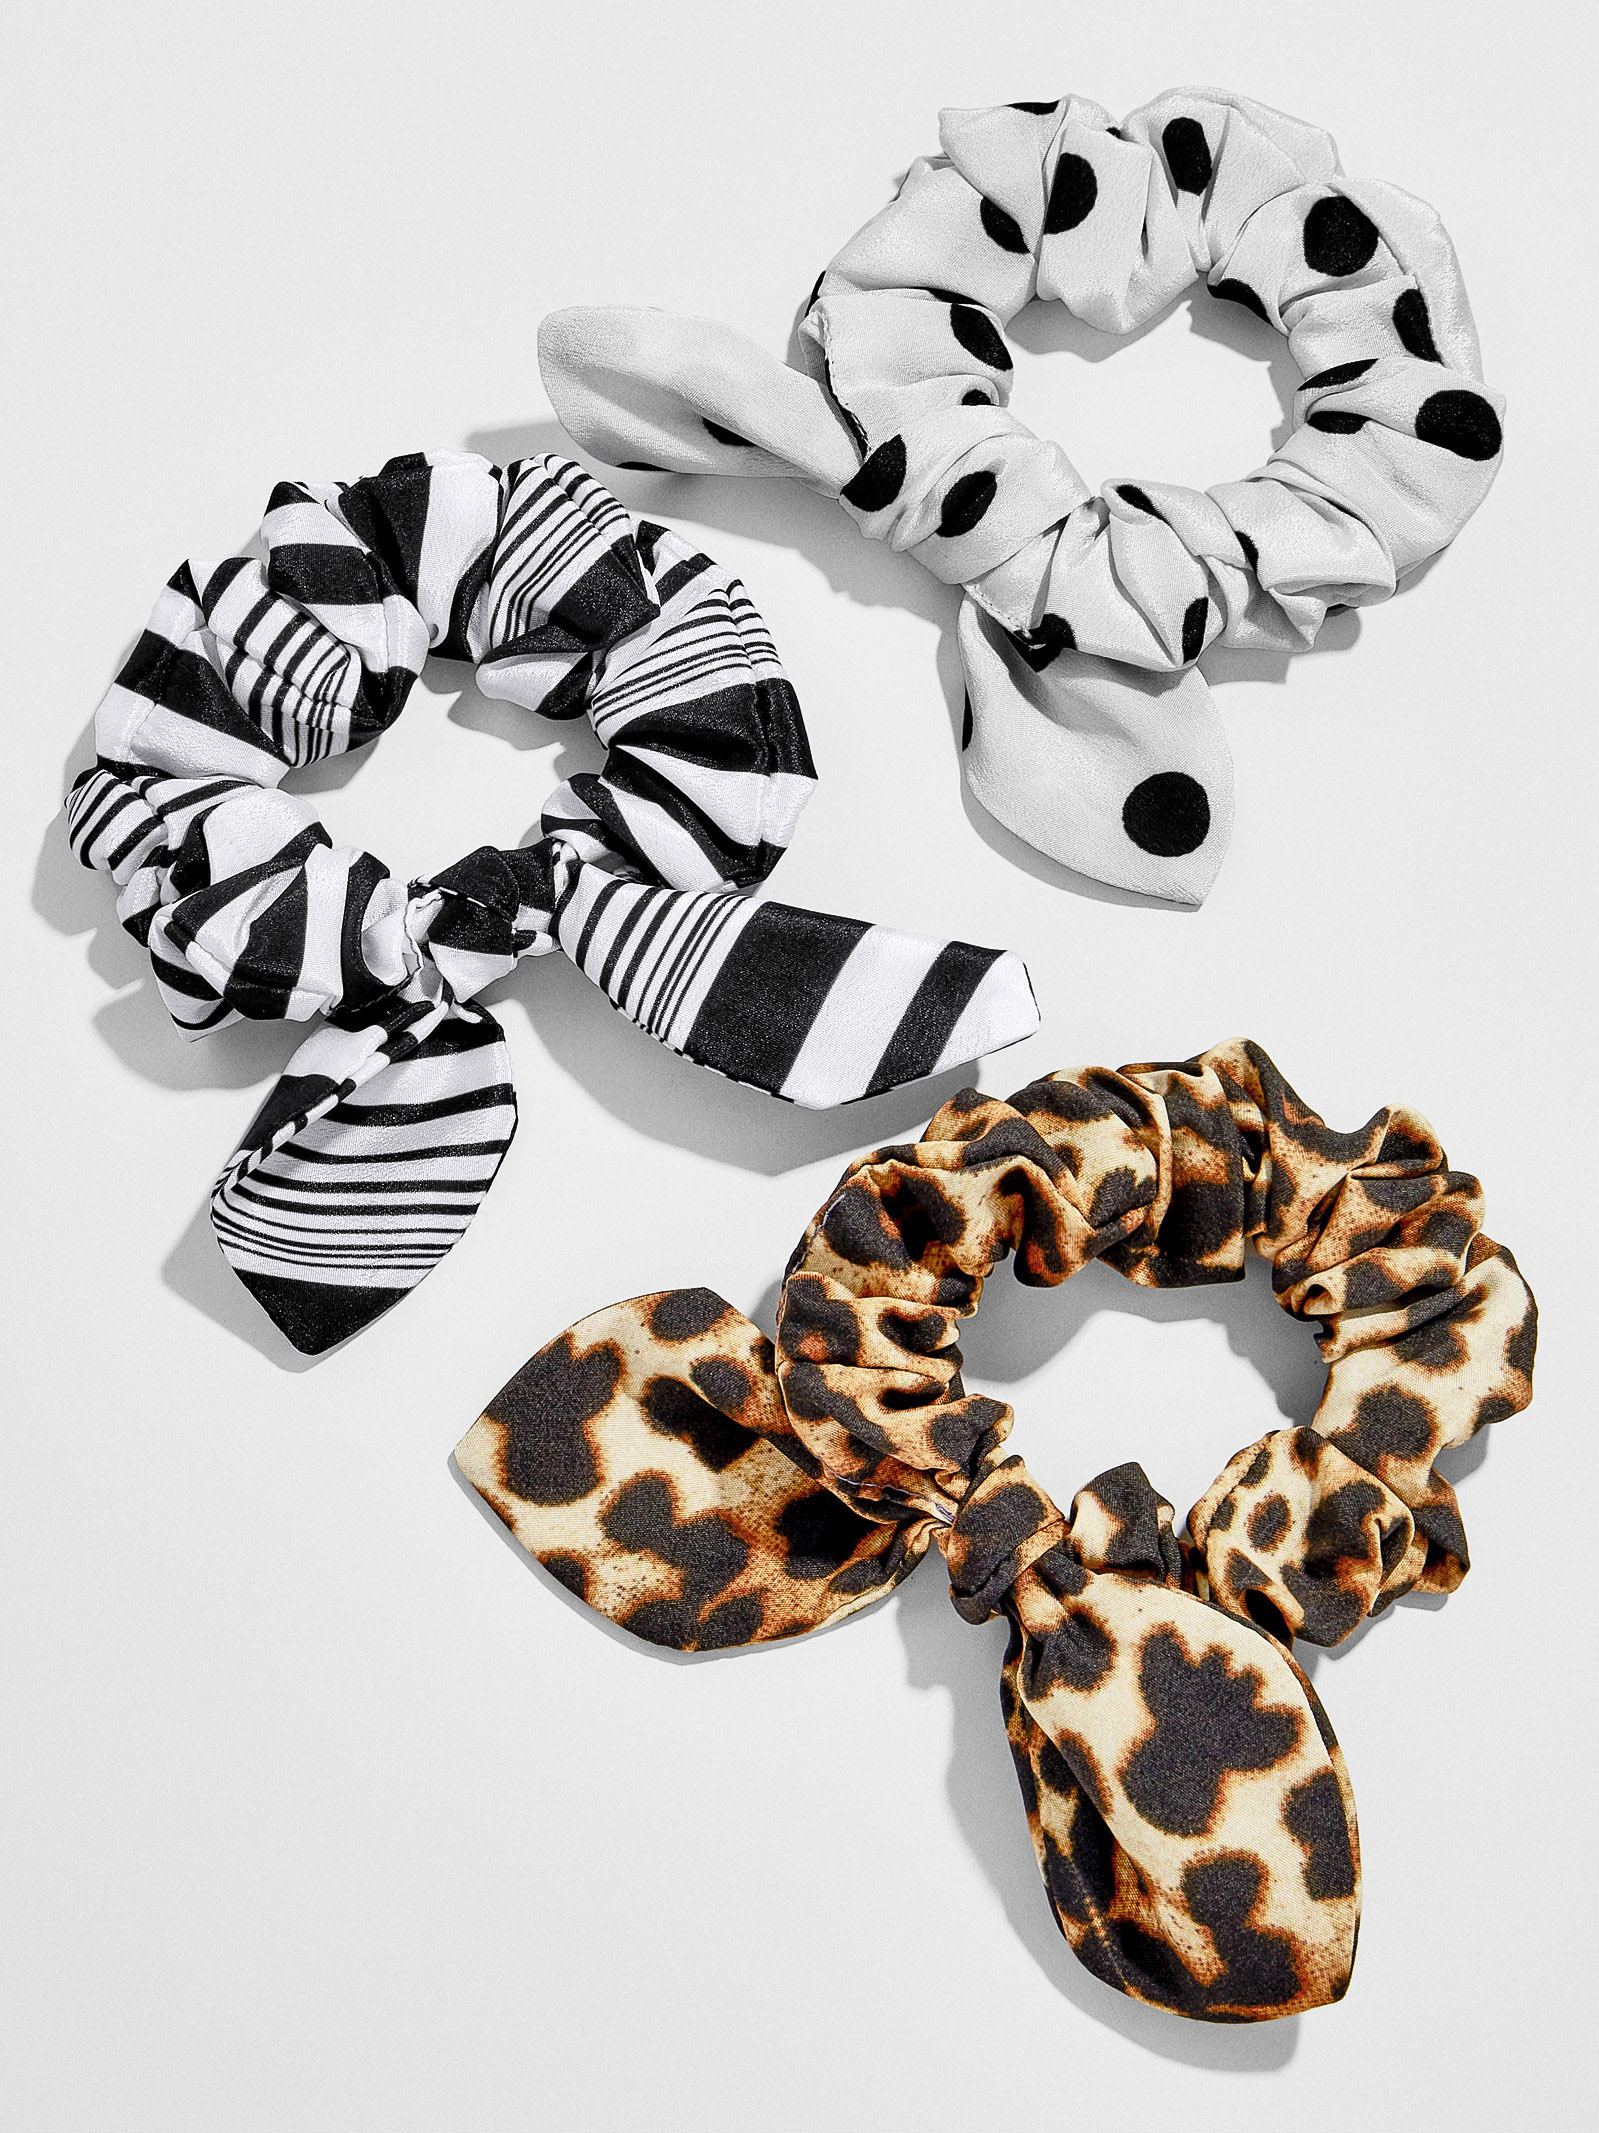 BaubleBar Launches Collection of Trendy Hair Accessories: Barrettes,  Scrunchies & More